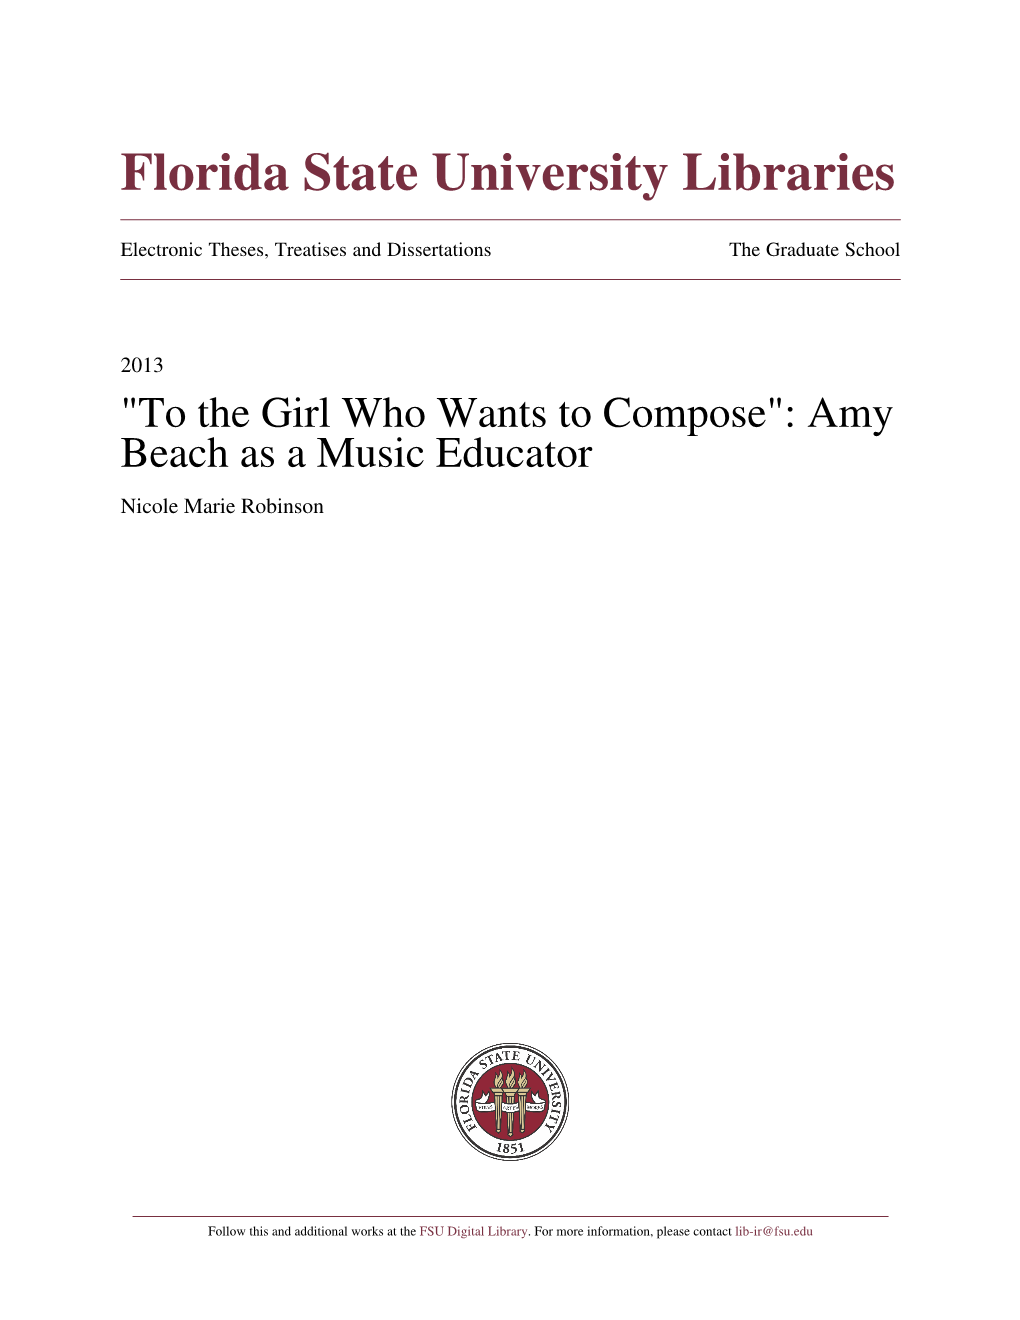 "To the Girl Who Wants to Compose": Amy Beach As a Music Educator Nicole Marie Robinson